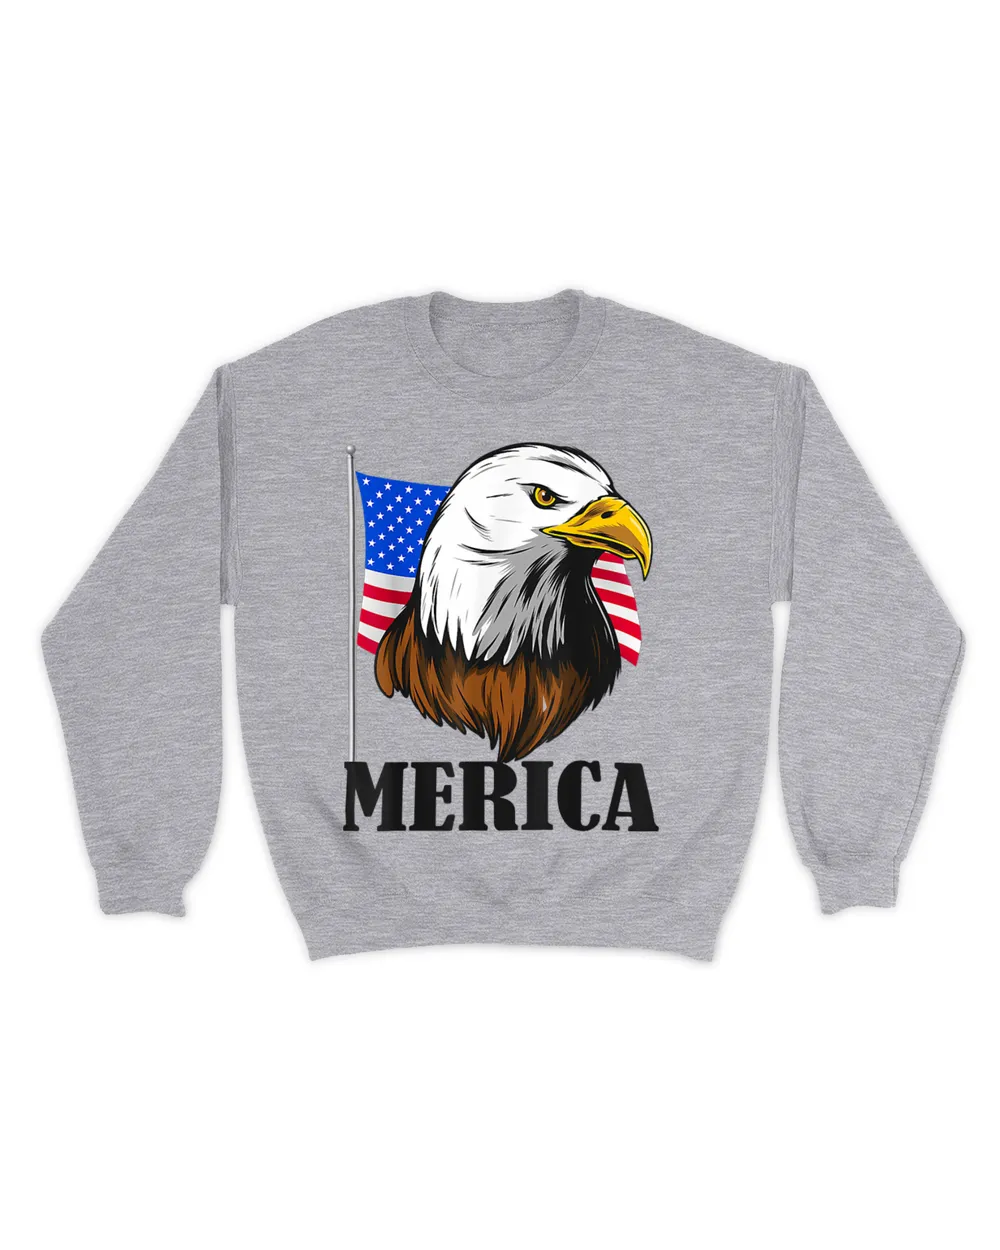 Merica Bald Eagle Independence Day Patriot USA